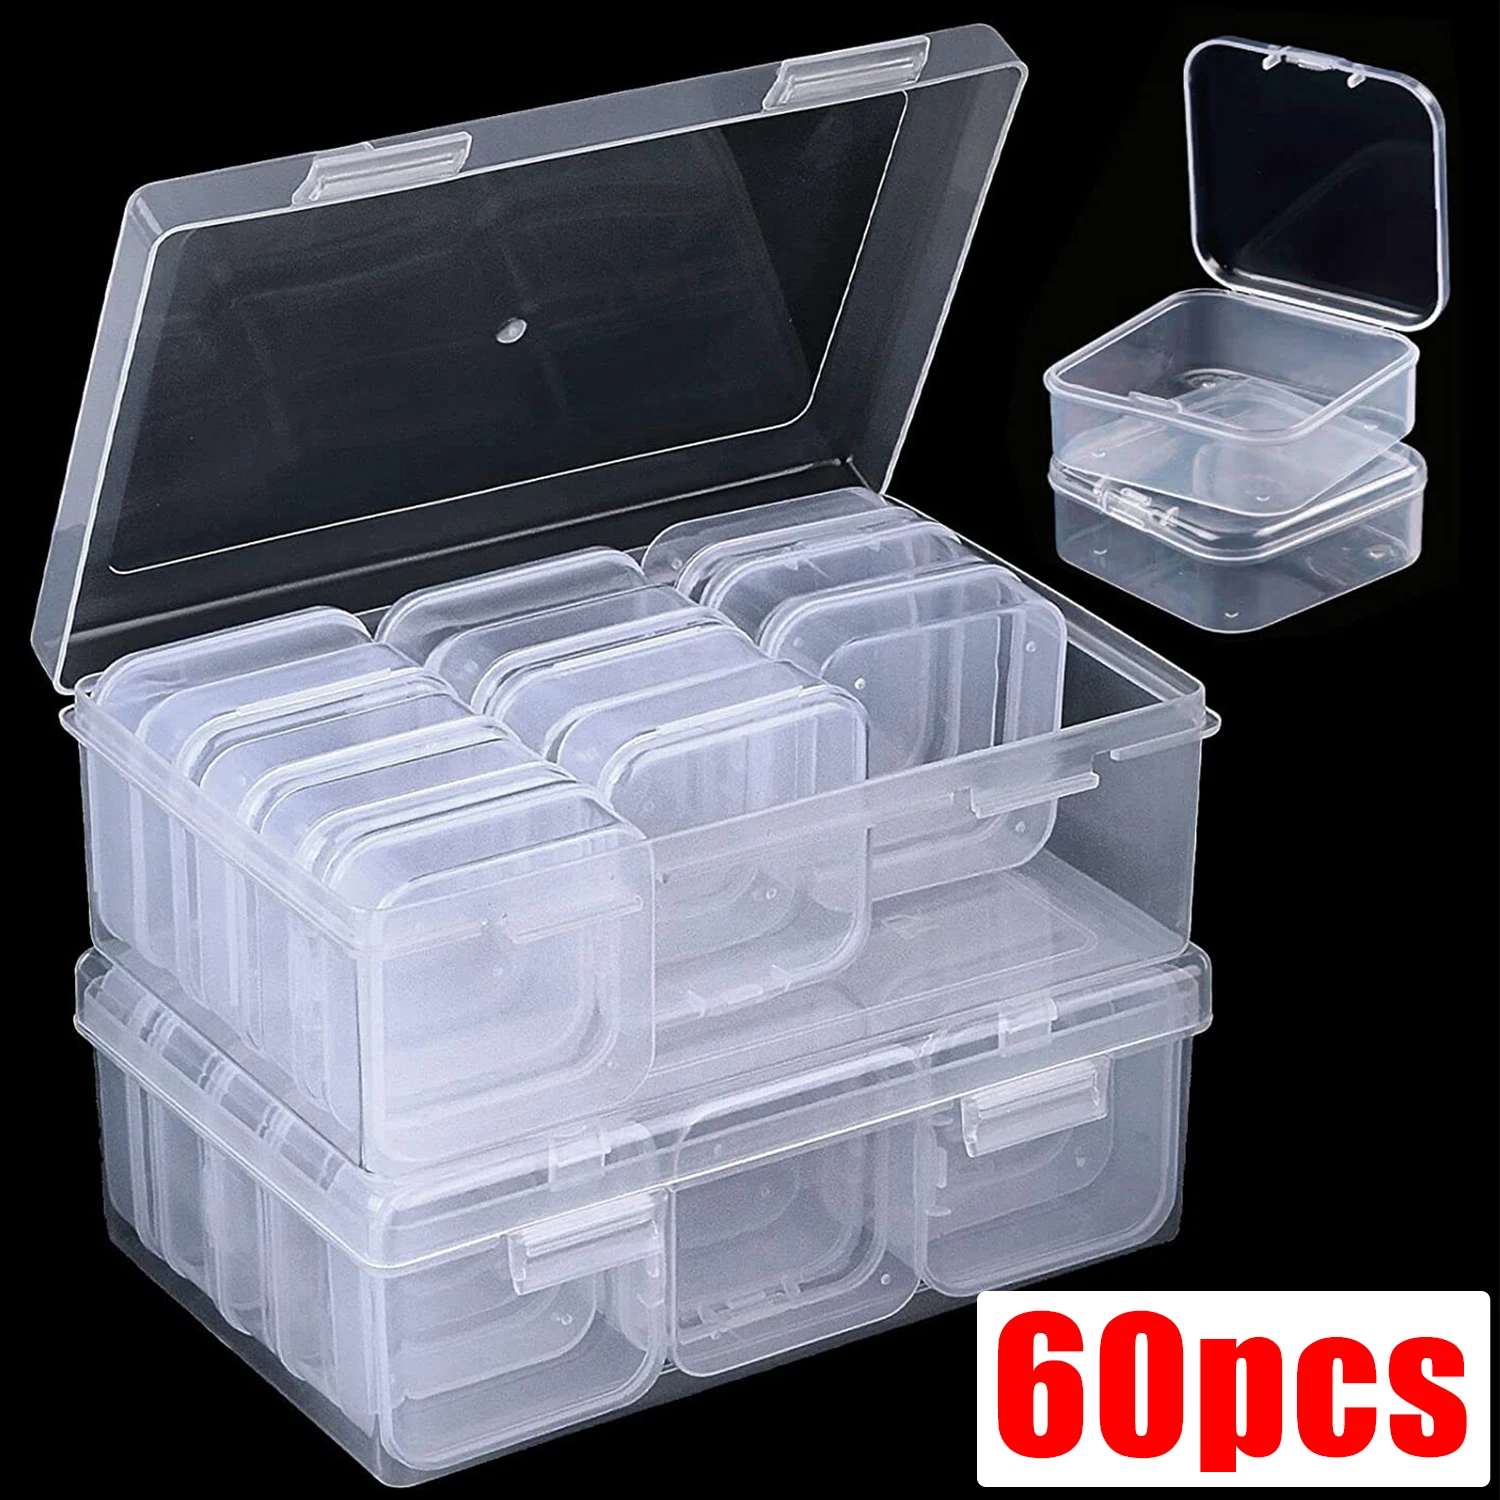 60 Packs Clear Small Plastic Containers Transparent Storage Box with Hinged Lid for Items Crafts Jewelry Package Clear Cases 30 packs plastic transparent storage box for jewelry container with hinged lid for diy beads crafts package case clear cases